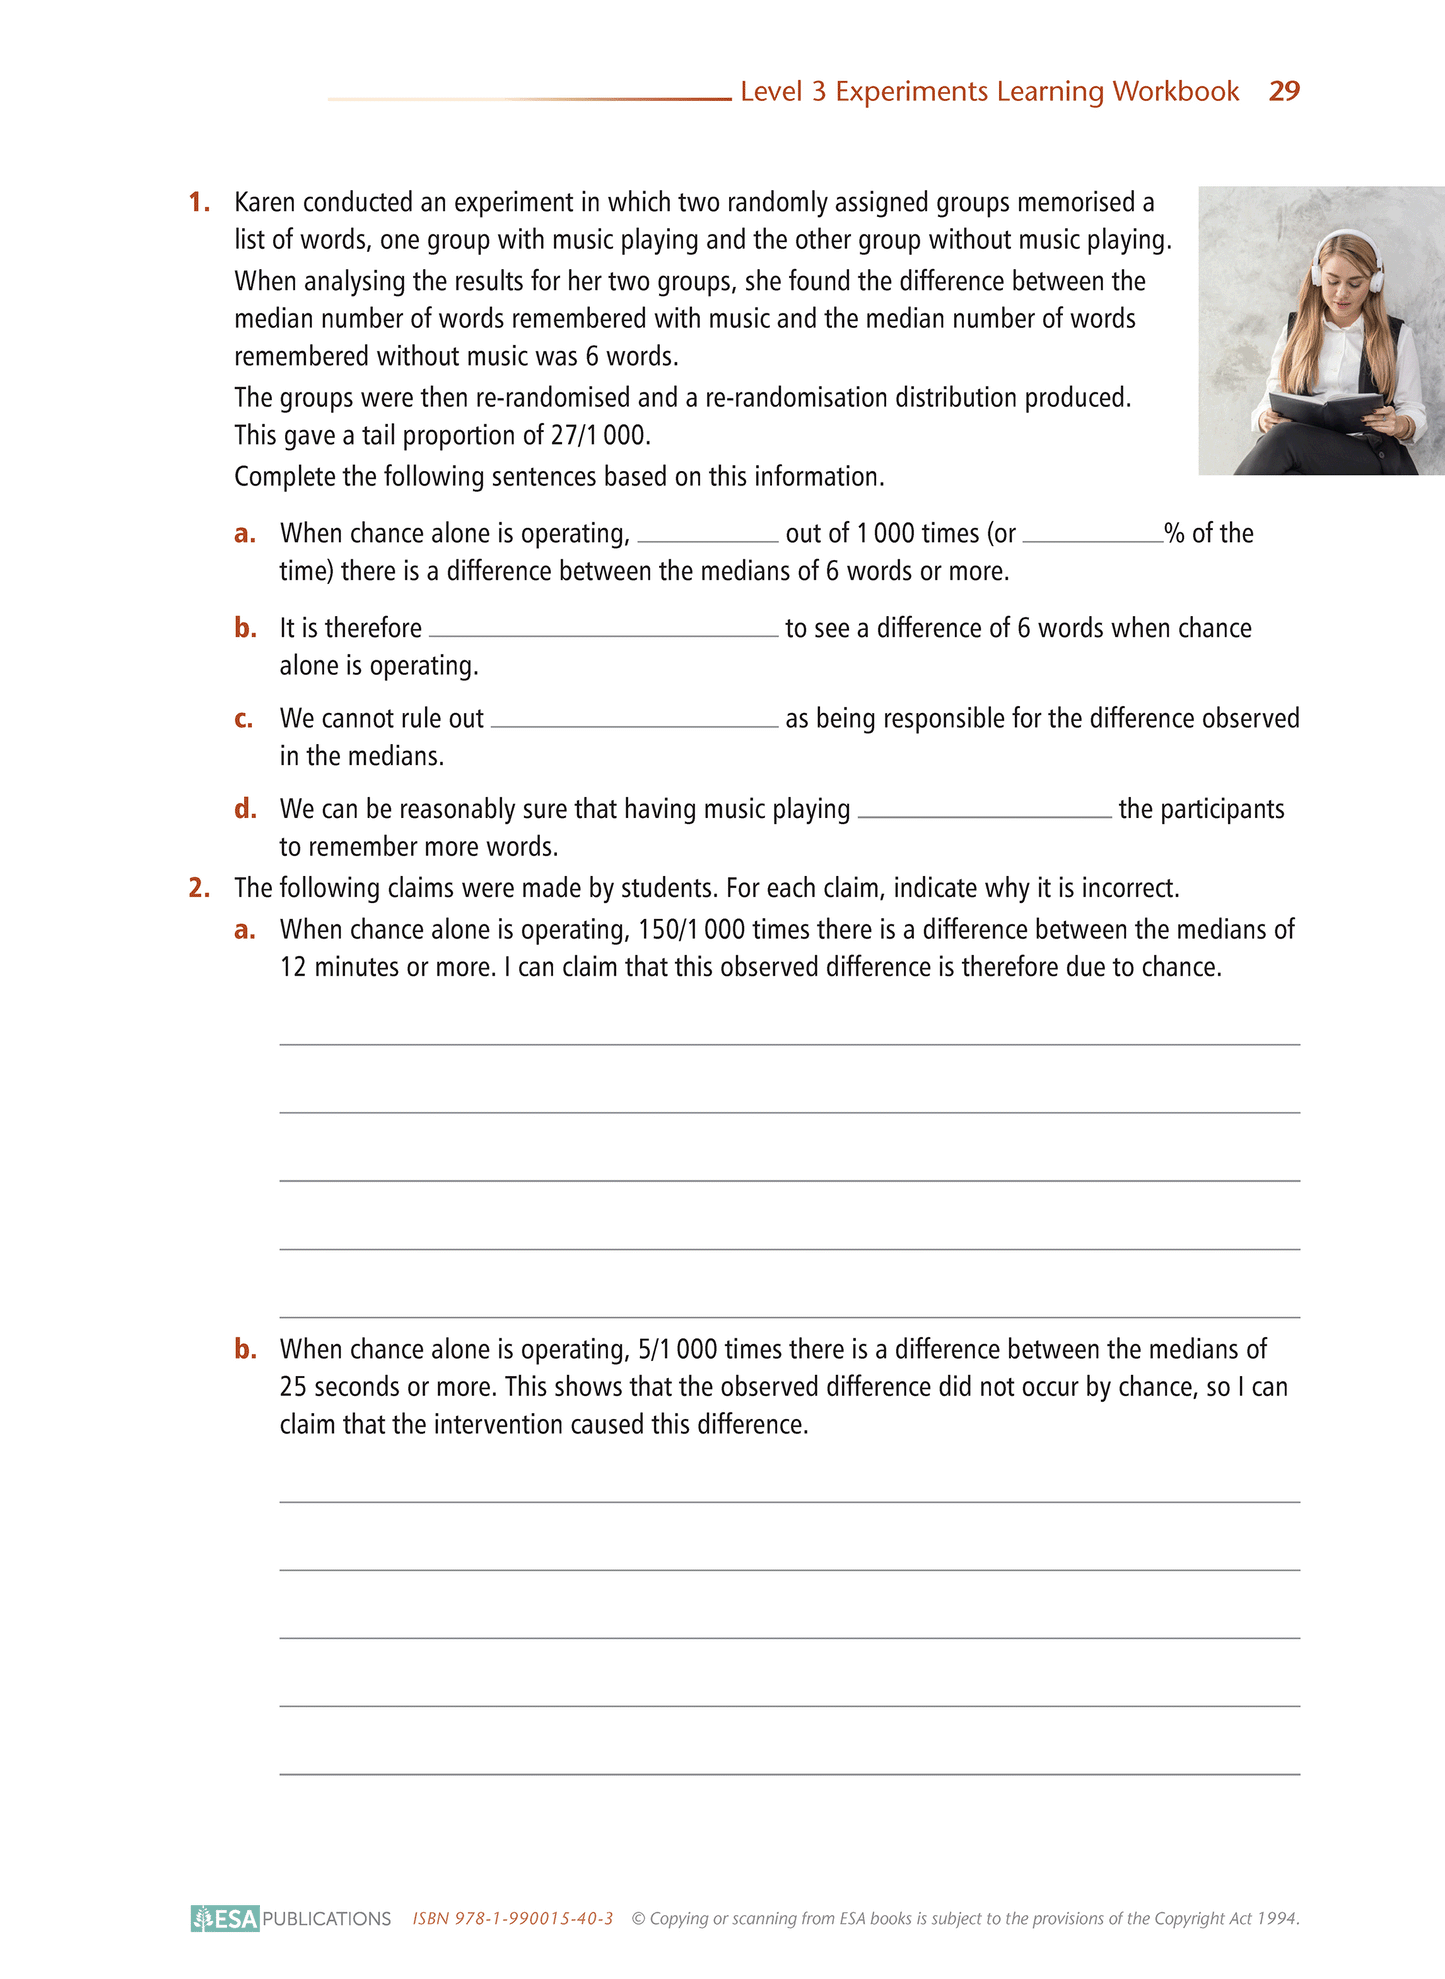 Level 3 Experiments 3.11 Learning Workbook